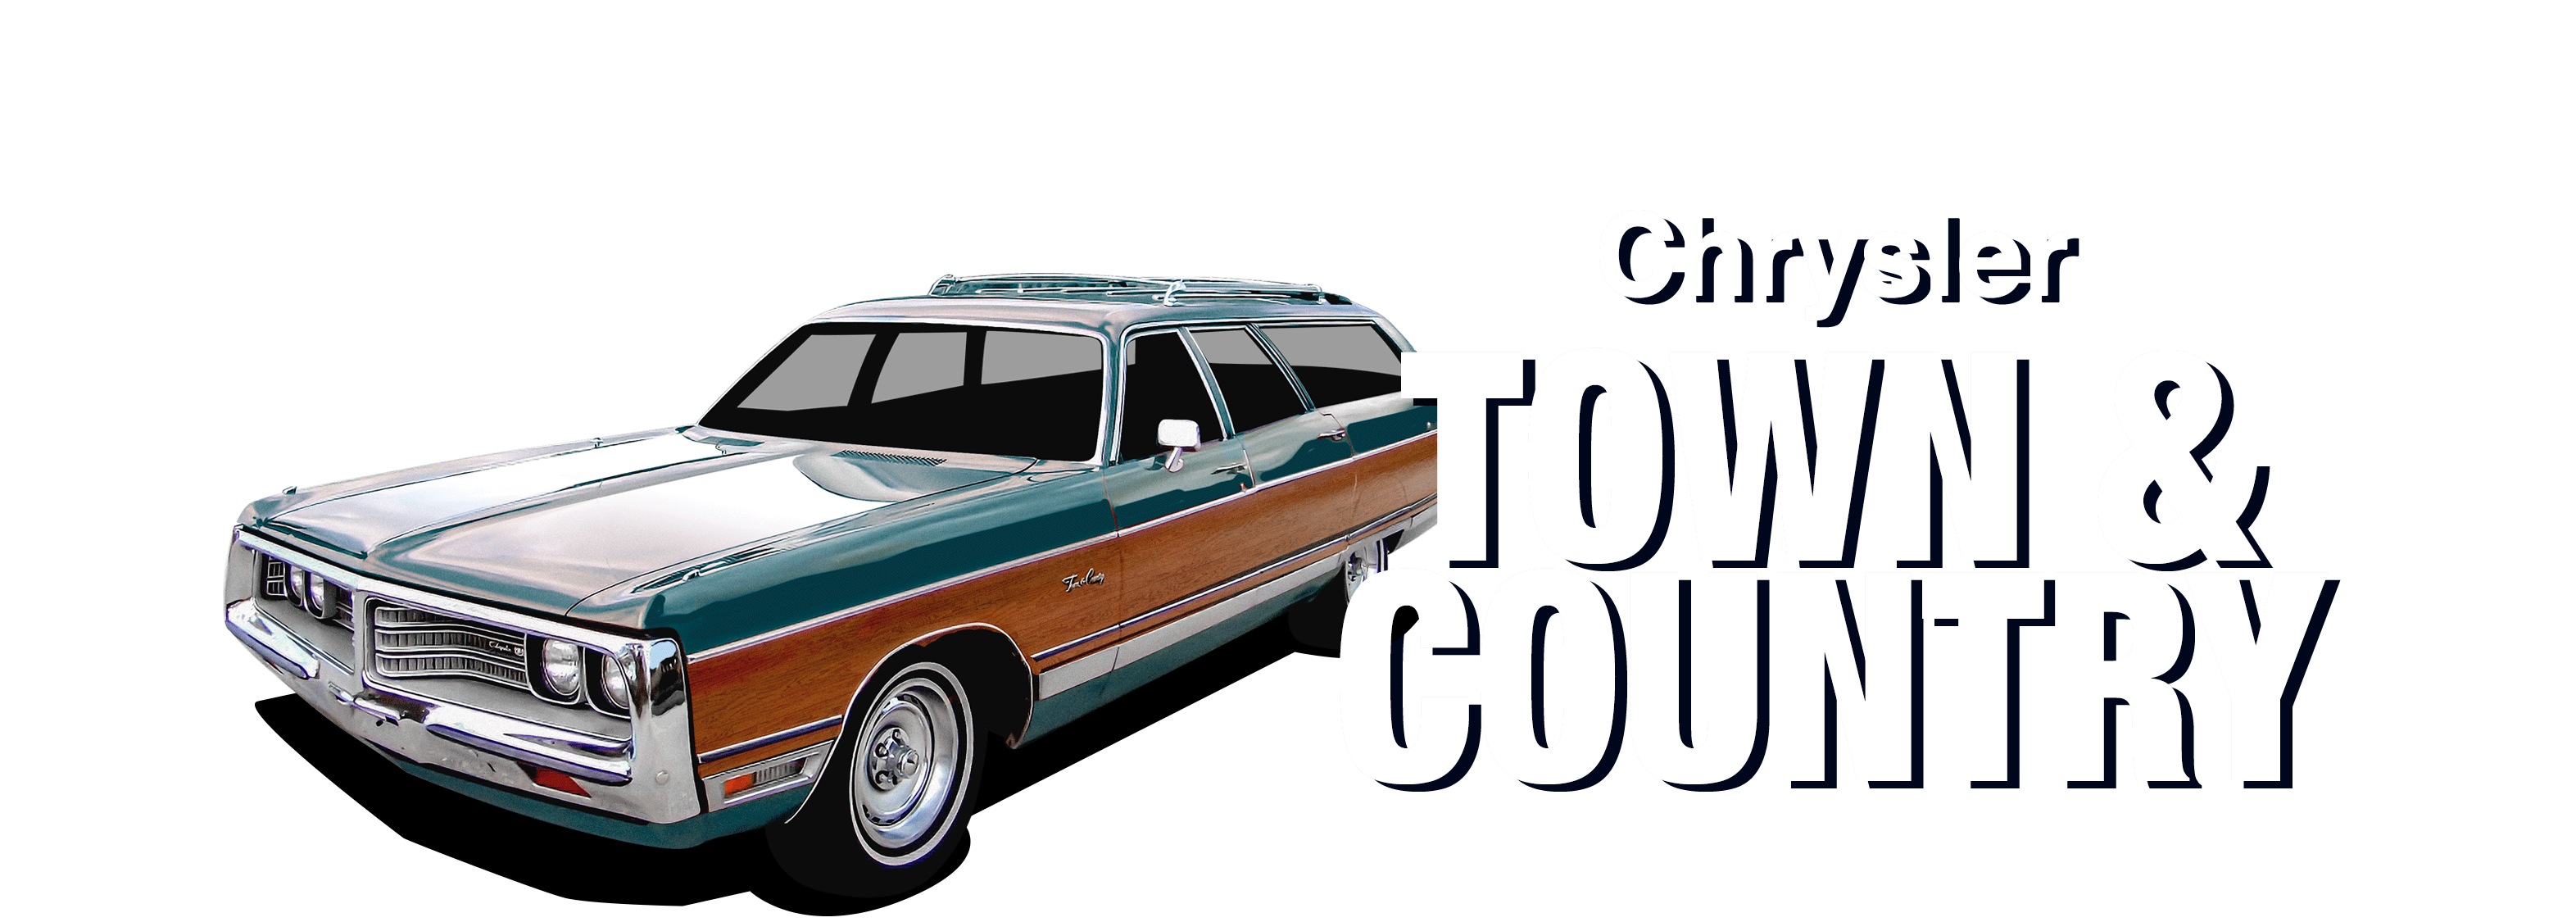 1965-1977 Chrysler Town & Country